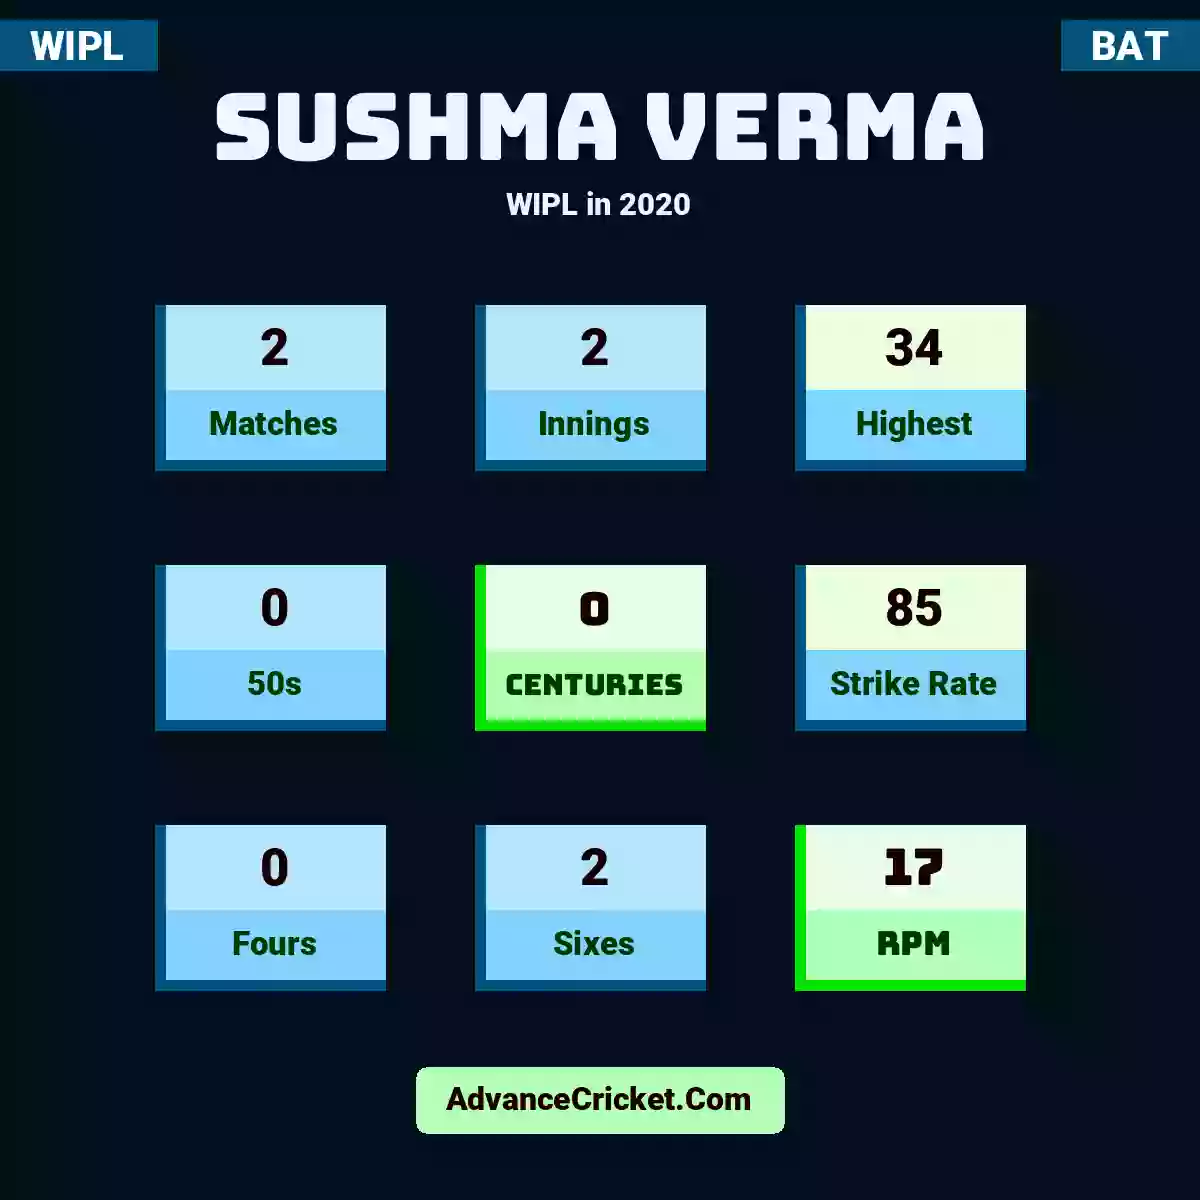 Sushma Verma WIPL  in 2020, Sushma Verma played 2 matches, scored 34 runs as highest, 0 half-centuries, and 0 centuries, with a strike rate of 85. S.Verma hit 0 fours and 2 sixes, with an RPM of 17.